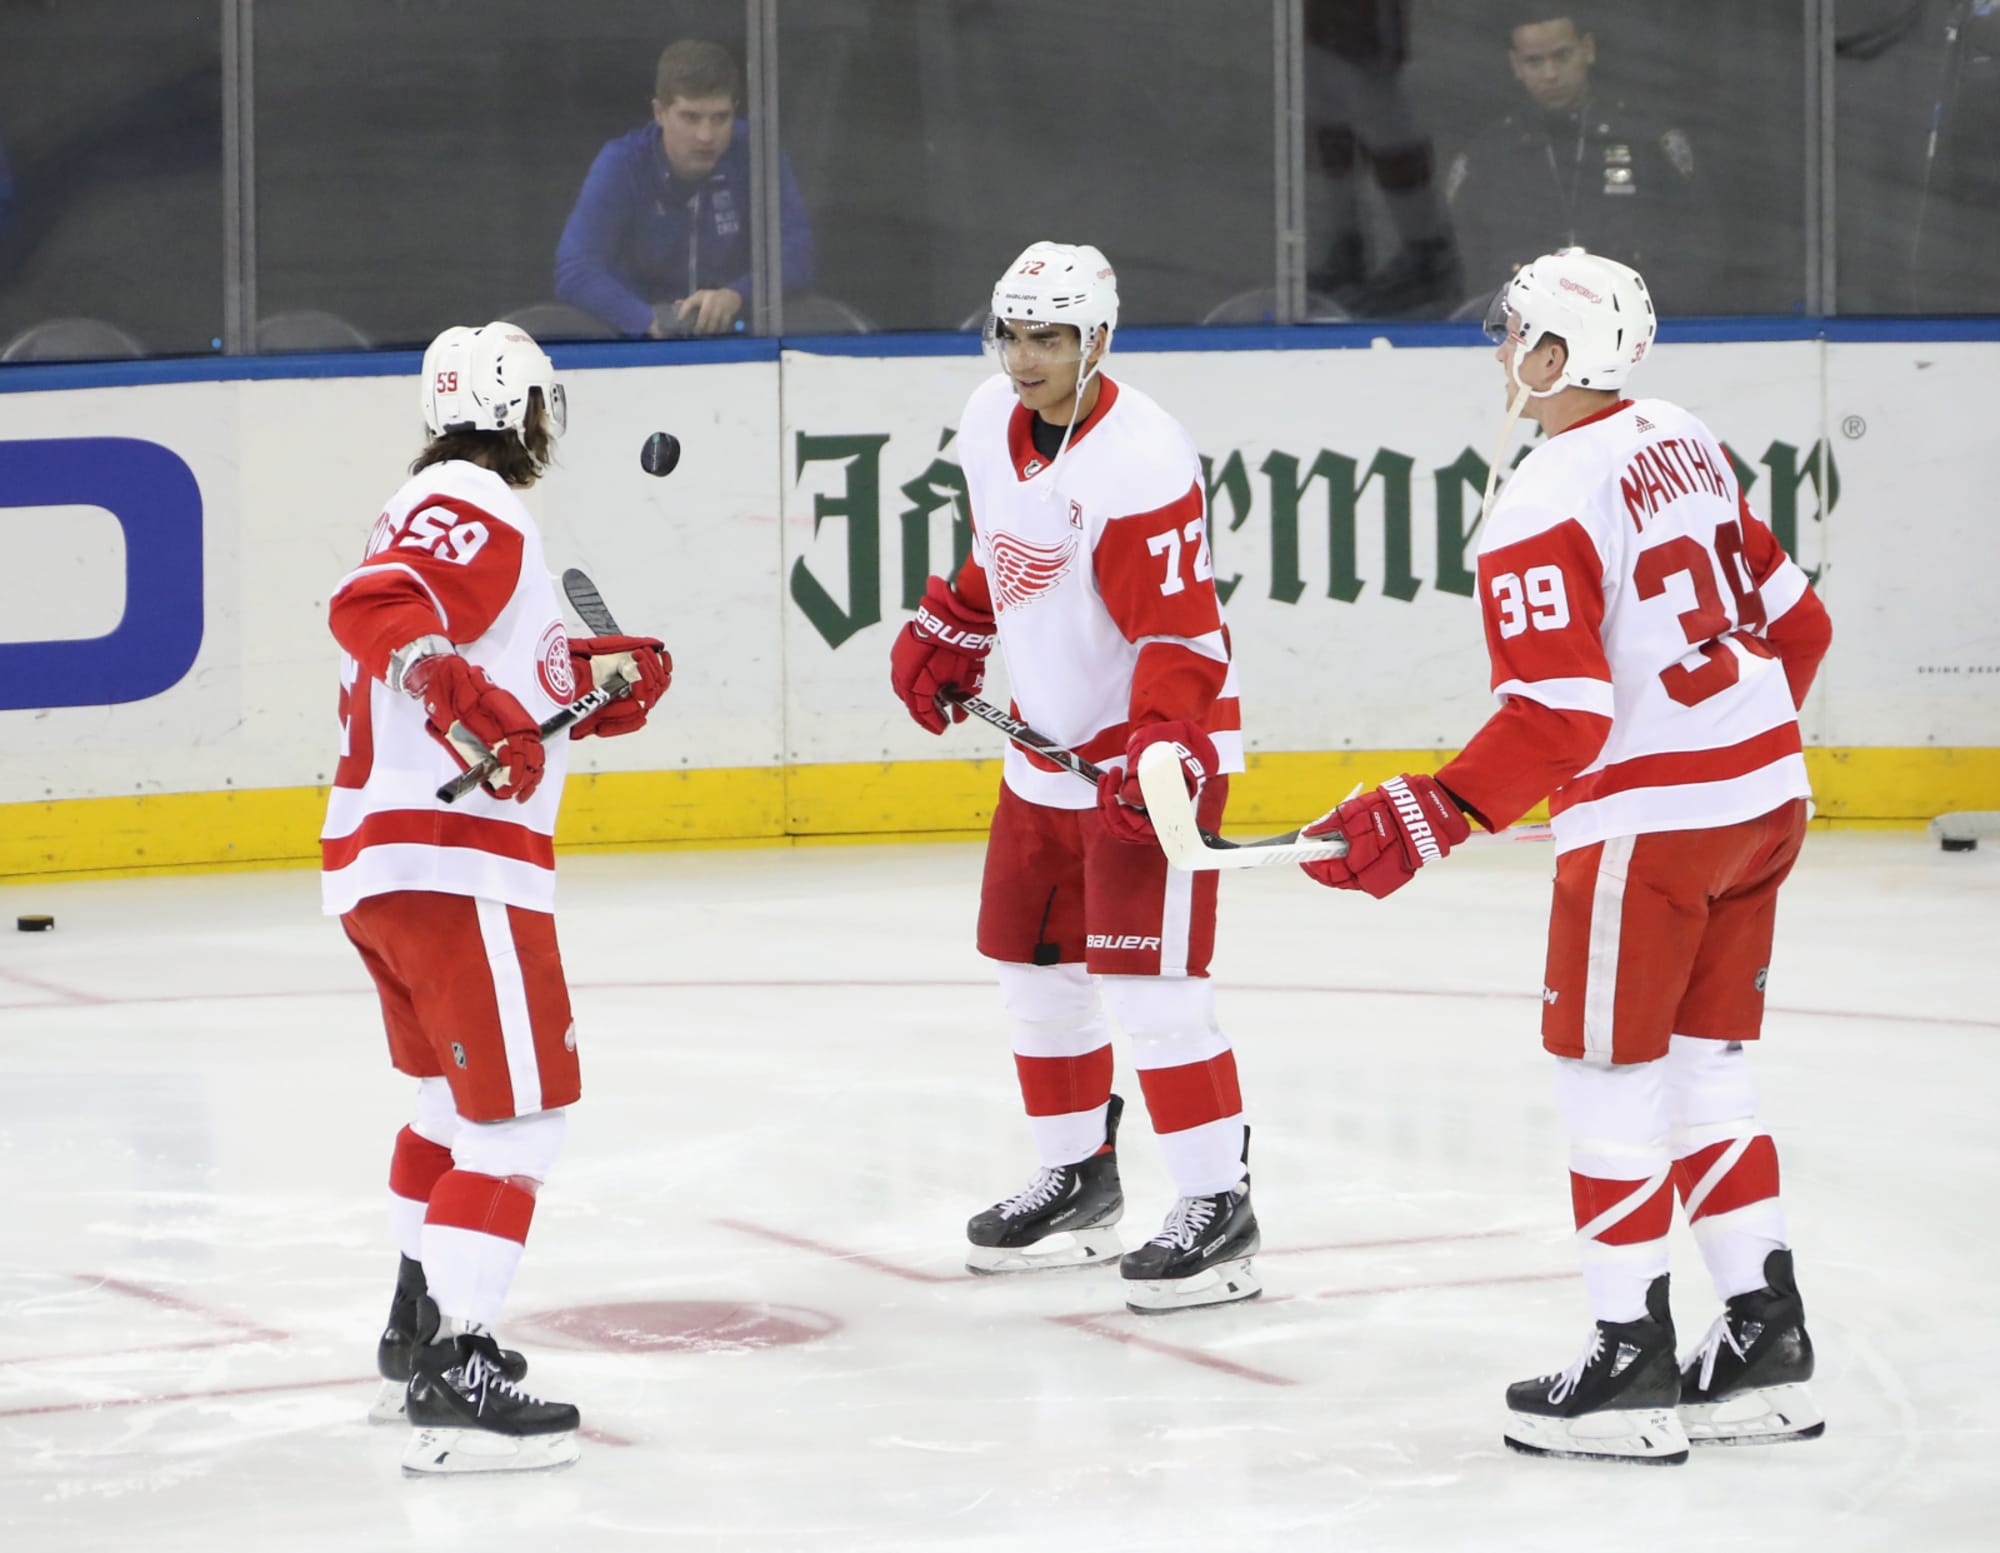 Detroit Red Wings players to participate in NHL 20 players tournament